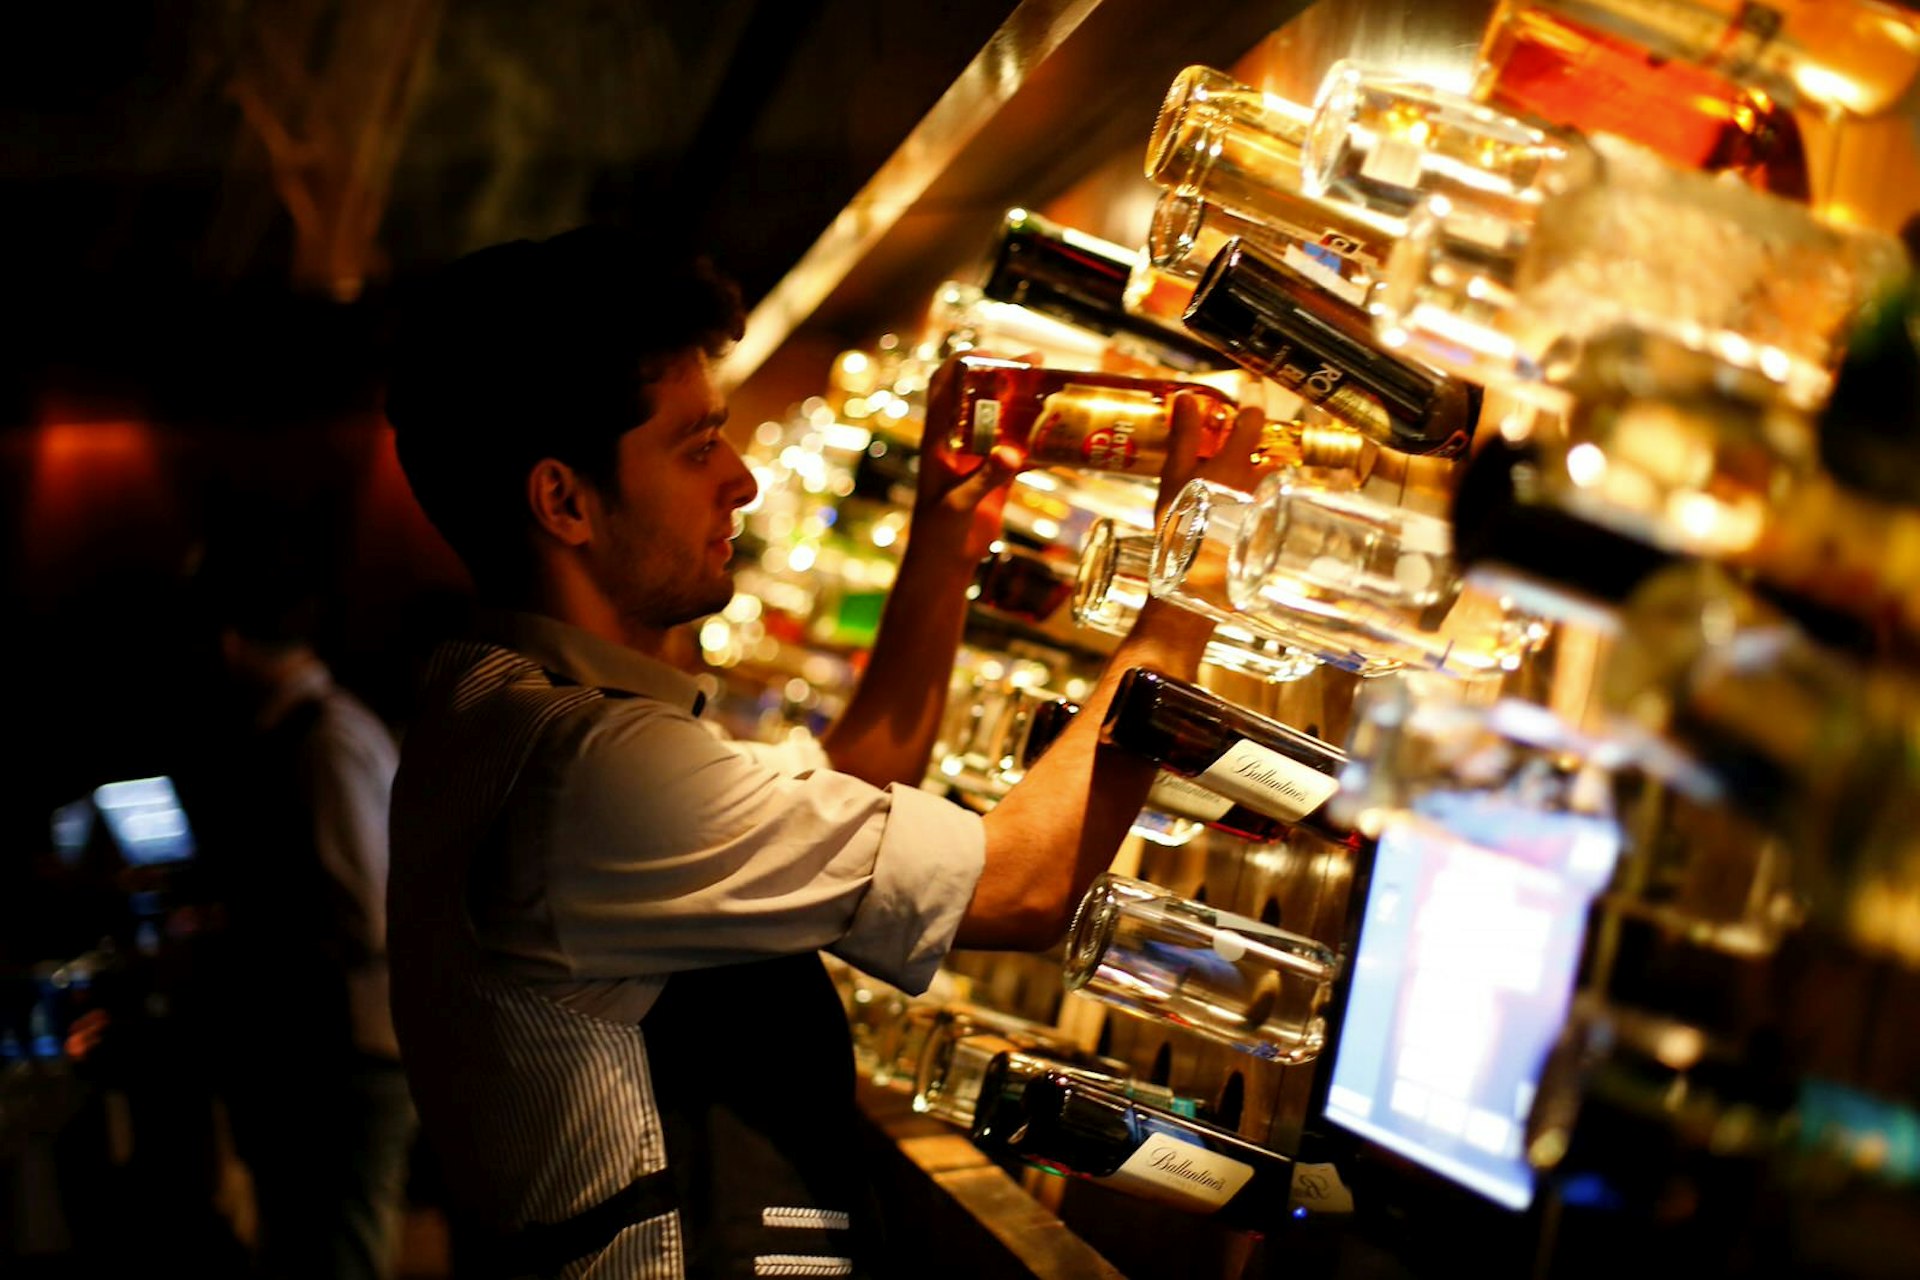 A man tends to the bar at a nightclub in Beirut, Lebanon